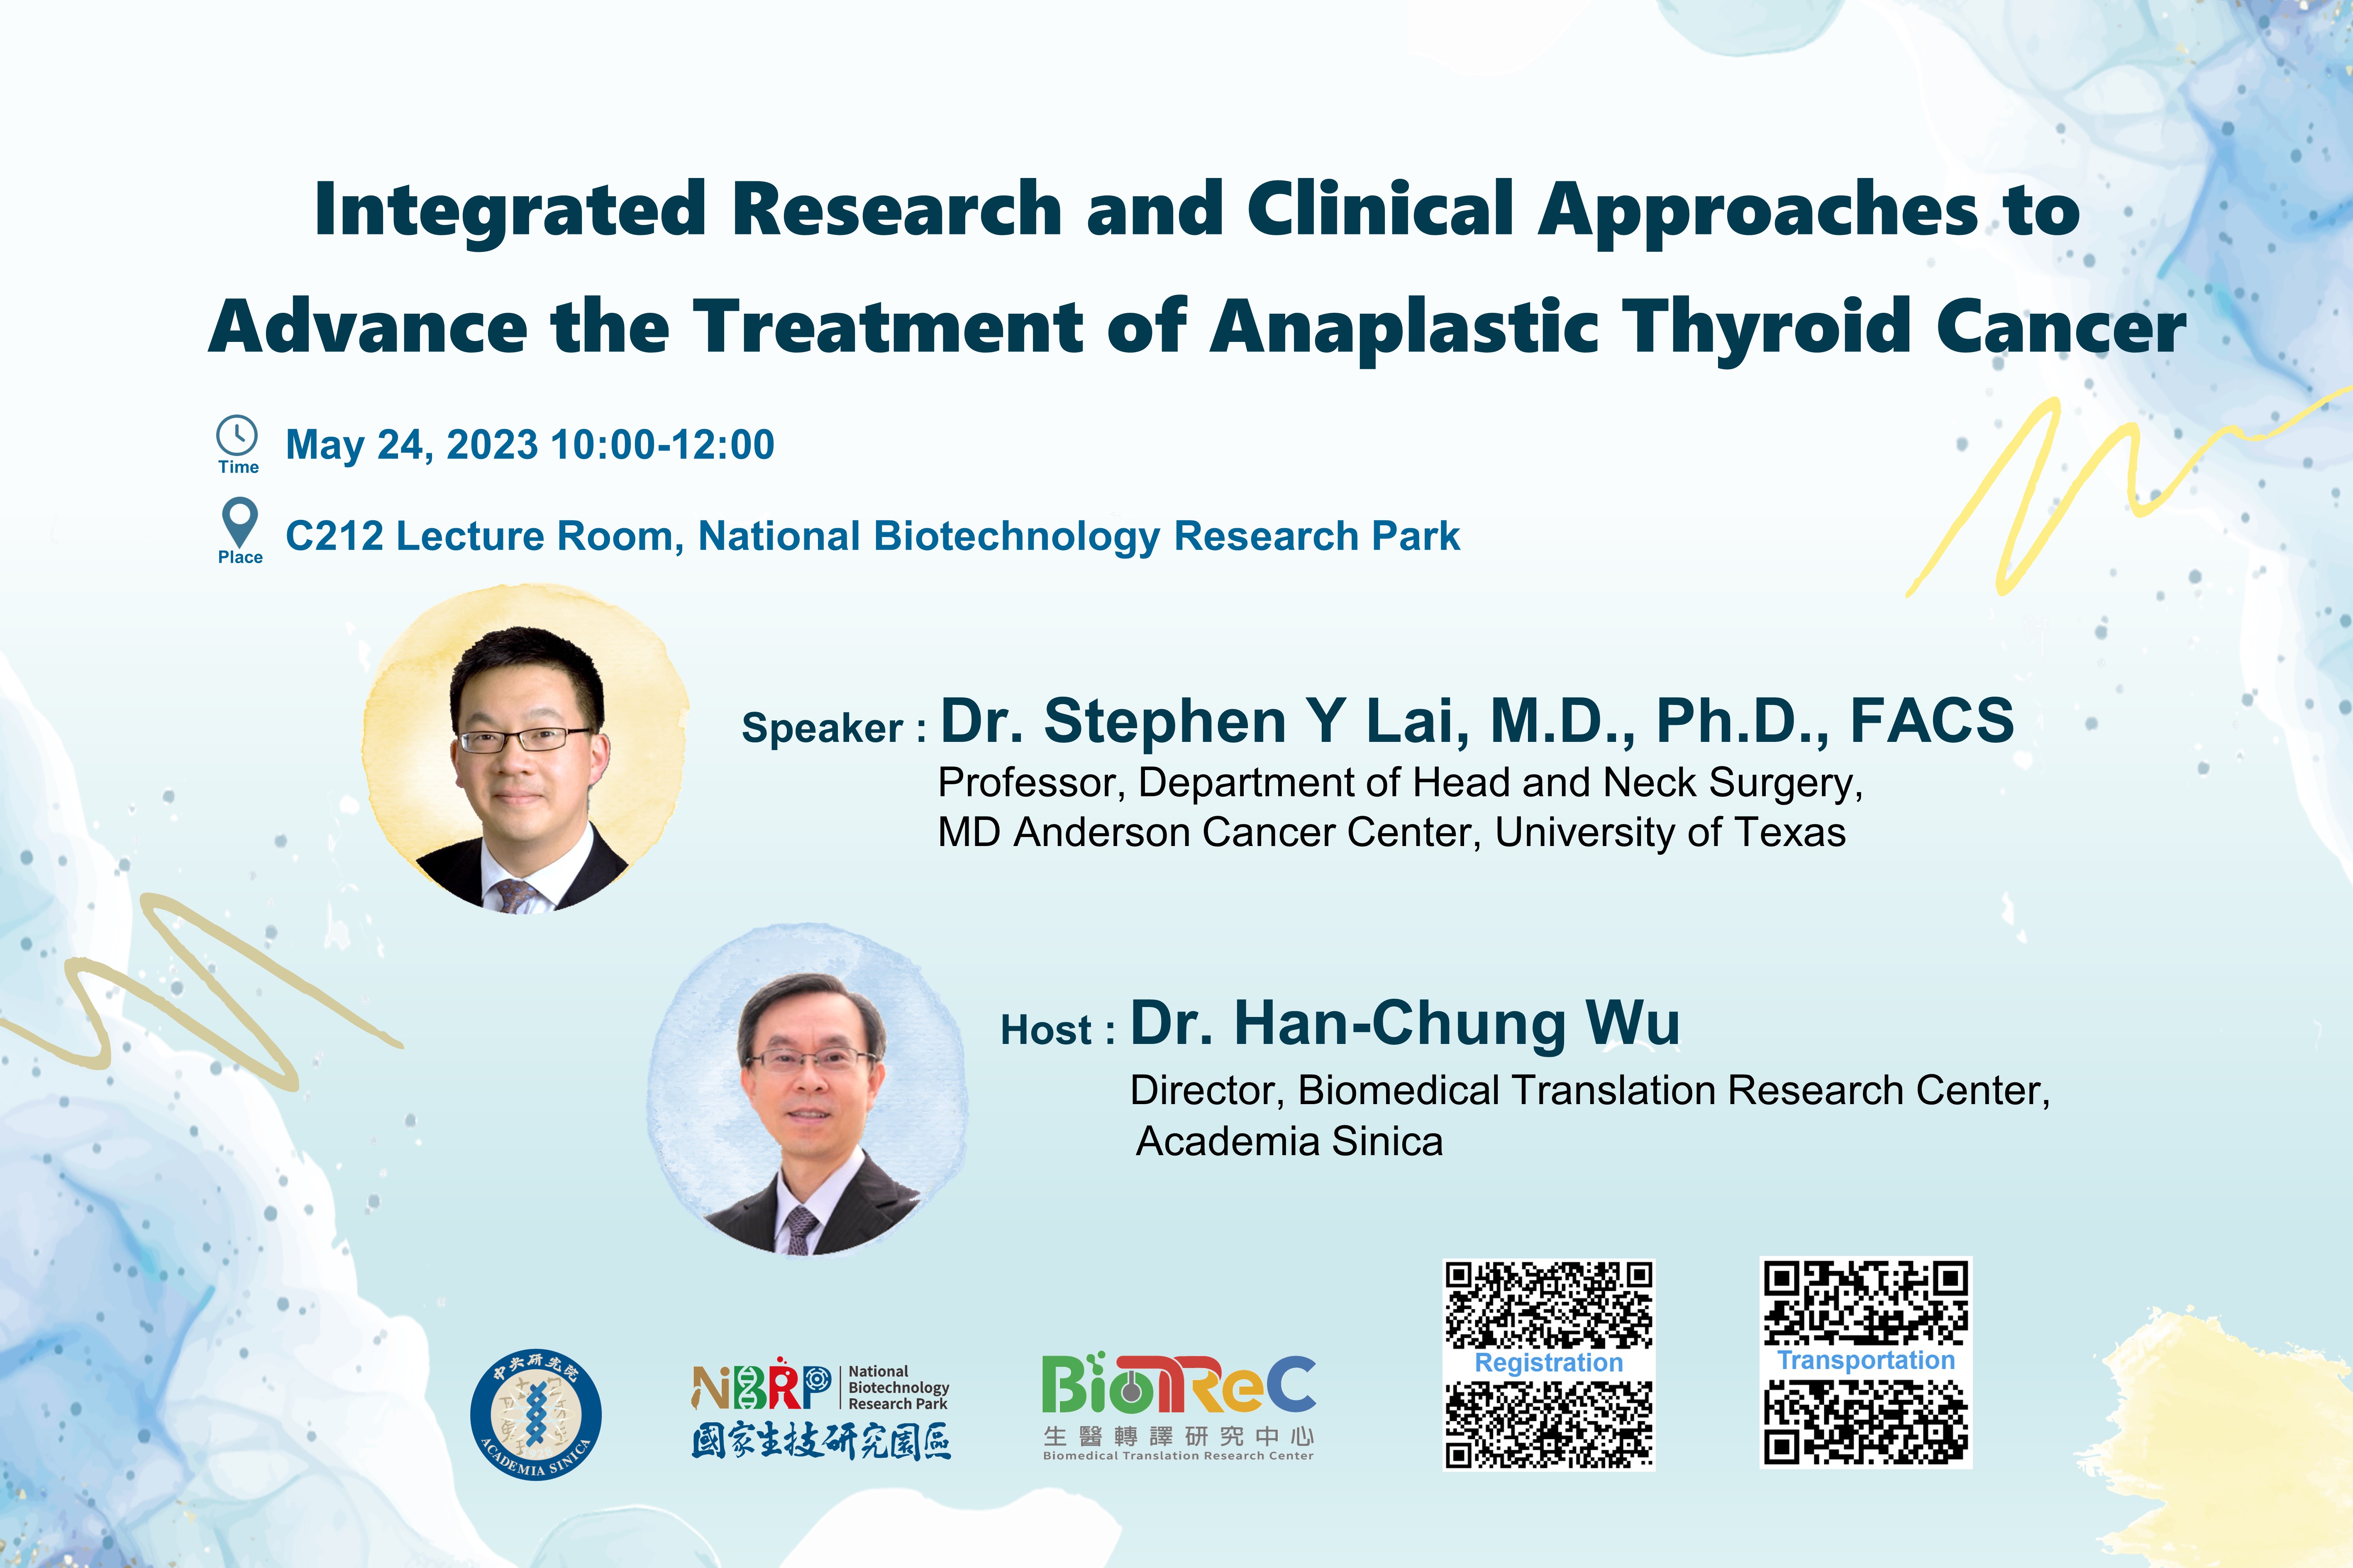 Integrated Research and Clinical Approaches to Advance the Treatment of Anaplastic Thyroid Cancer